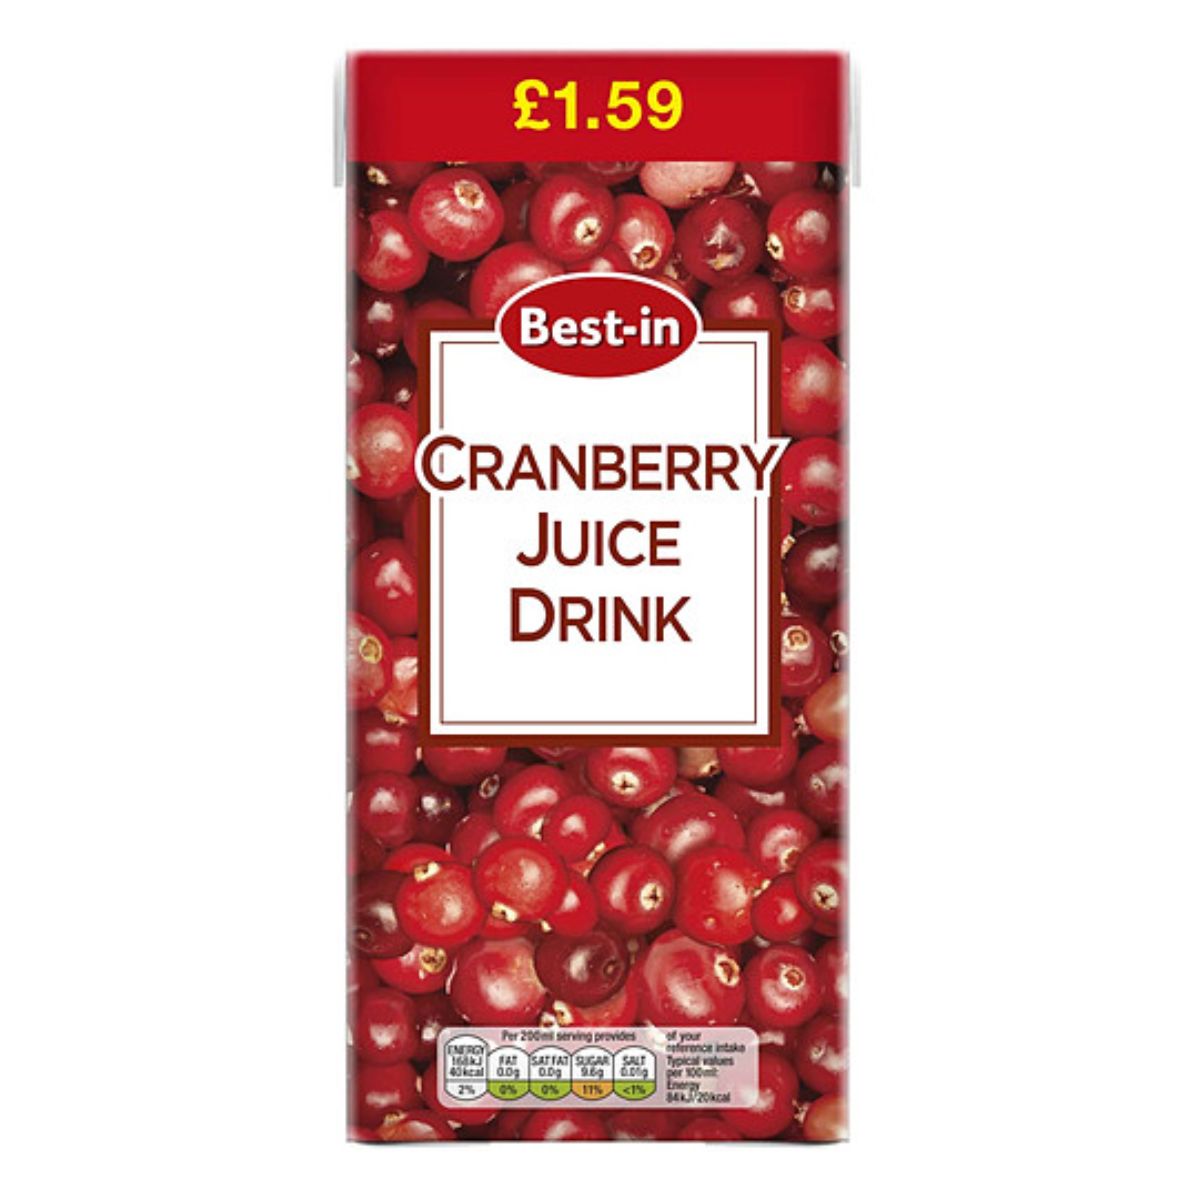 Carton of Best In Cranberry Juice - 1L priced at £1.59 with a prominent display of cranberries.